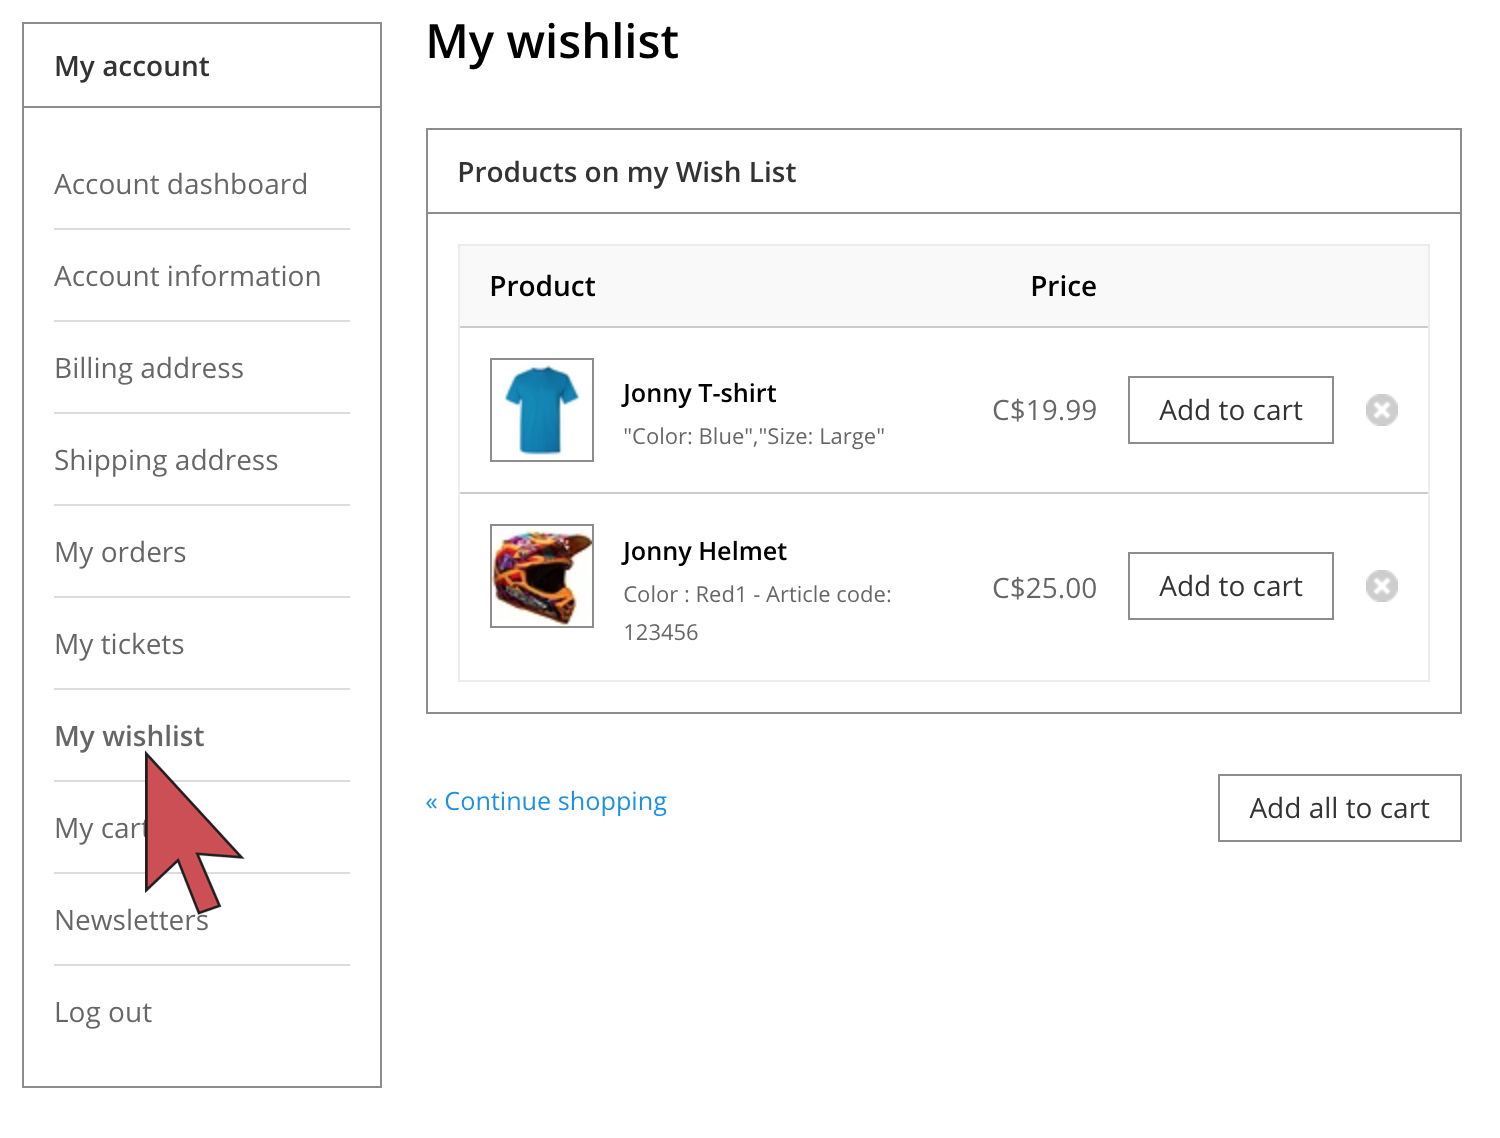 Displays an arrow pointing to the My wishlist button in the customer account on the wishlist page.